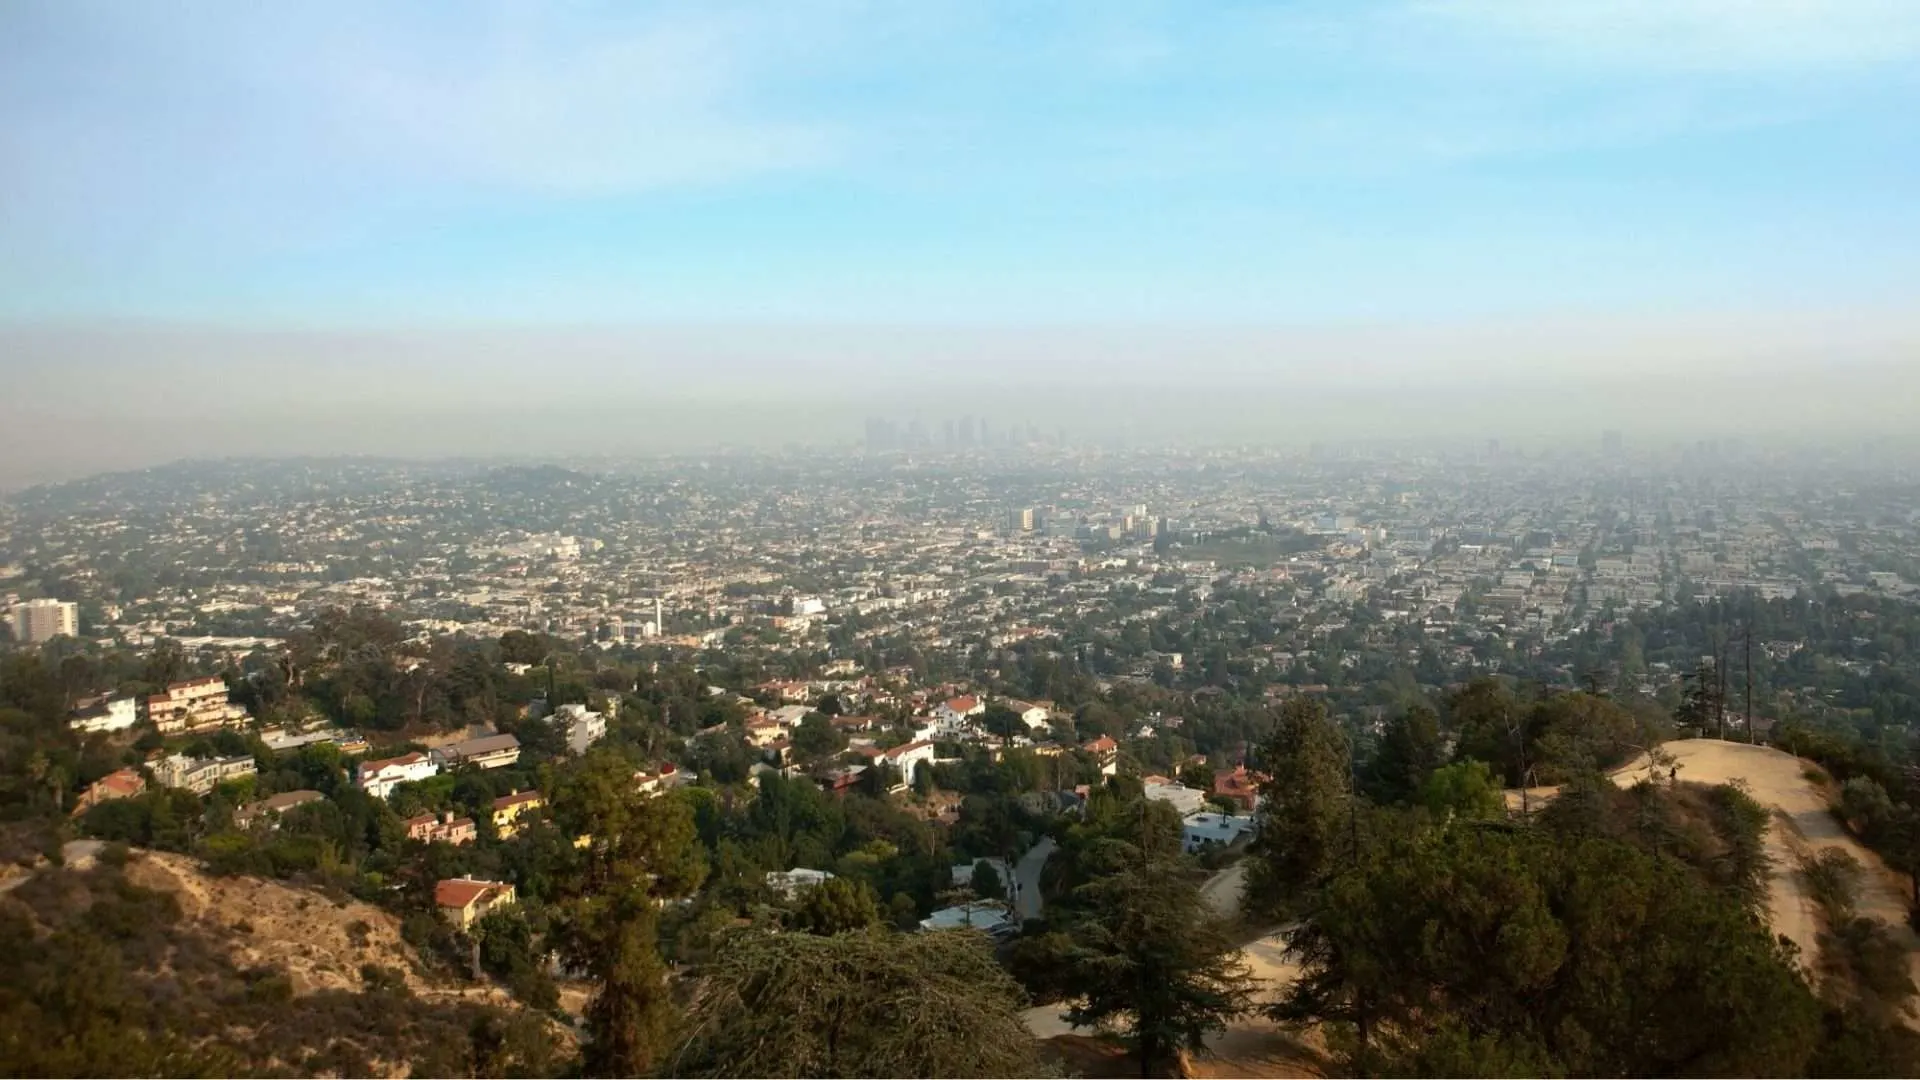 California air polution caused by generators and gas-powered engines